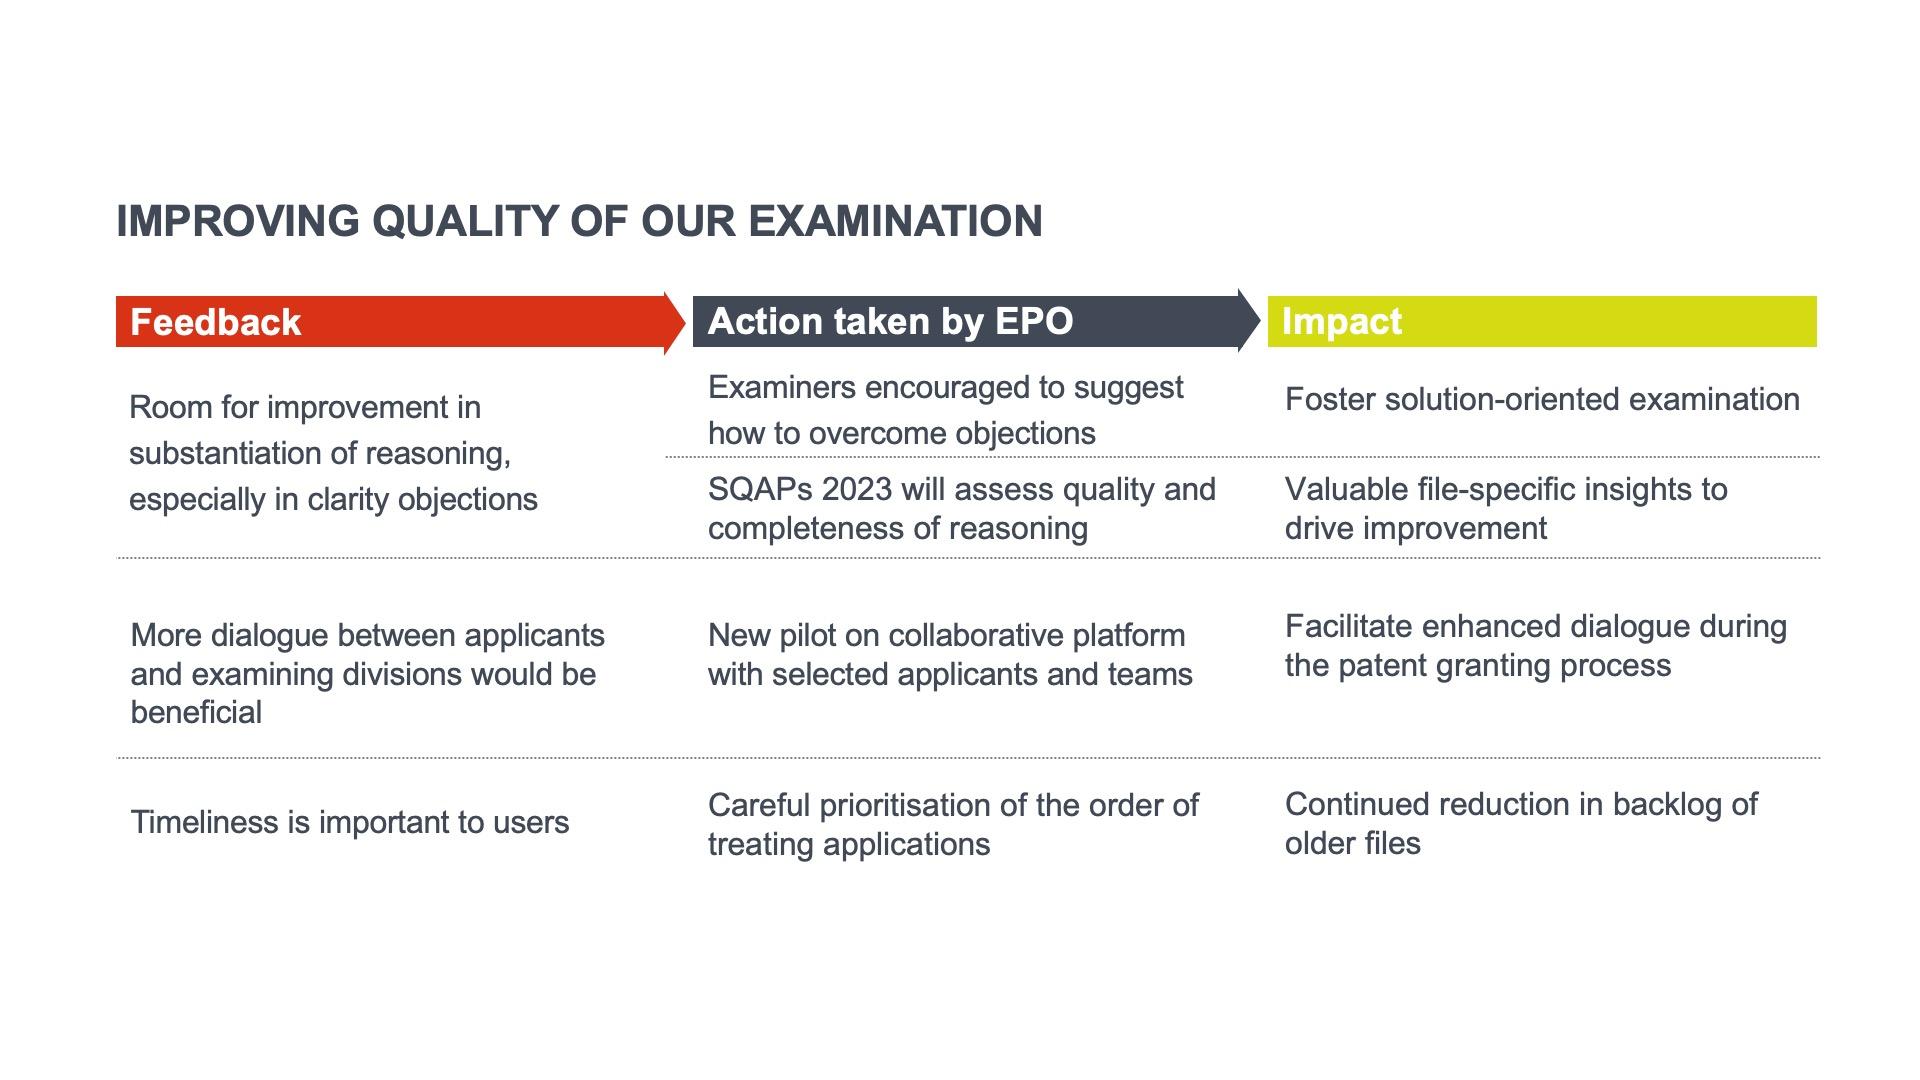 Overview of actions taken and impact of the feedback on examination